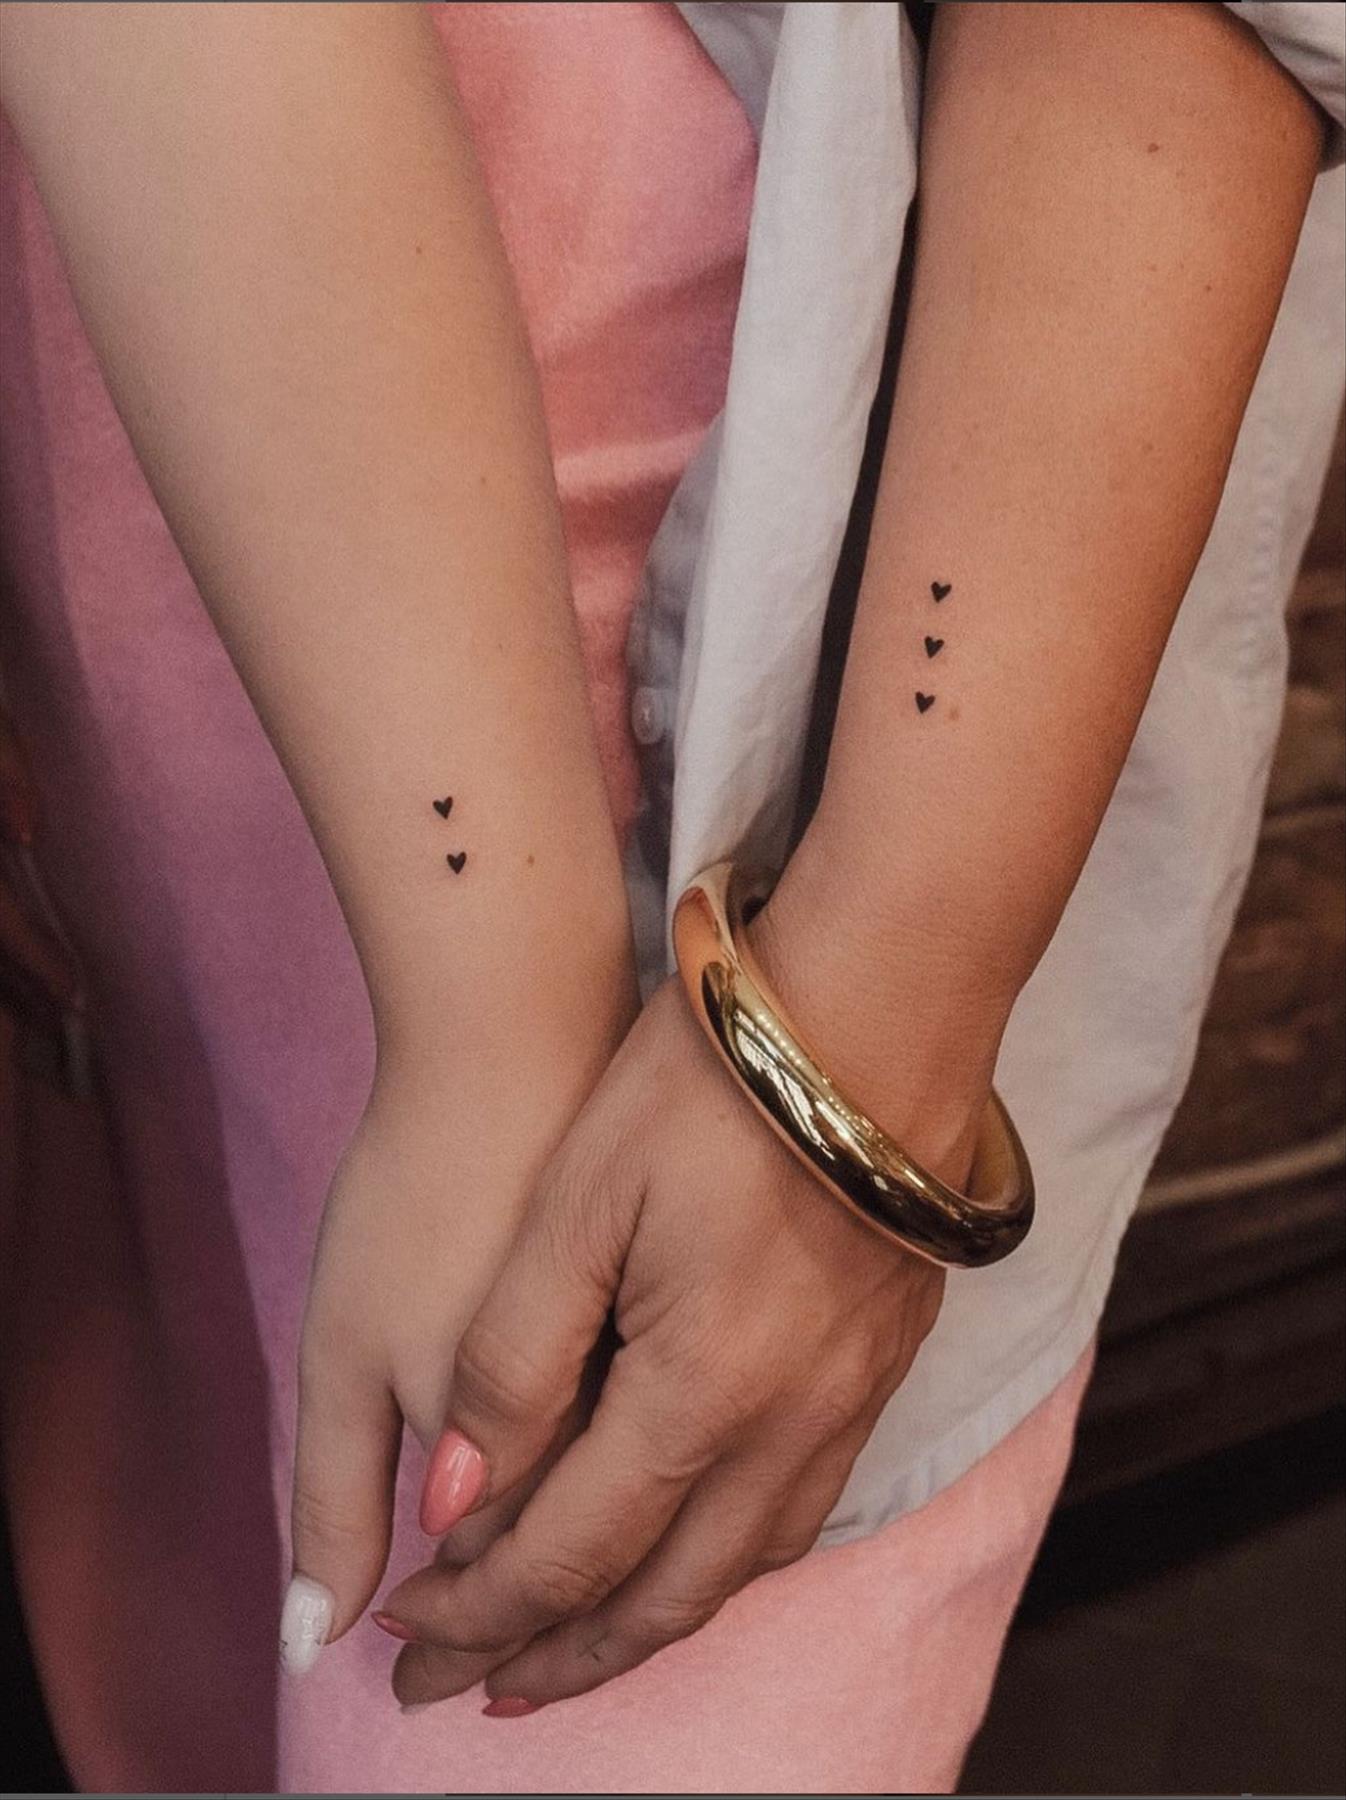 Cute small tattoo design ideas for your first tattoo attempt